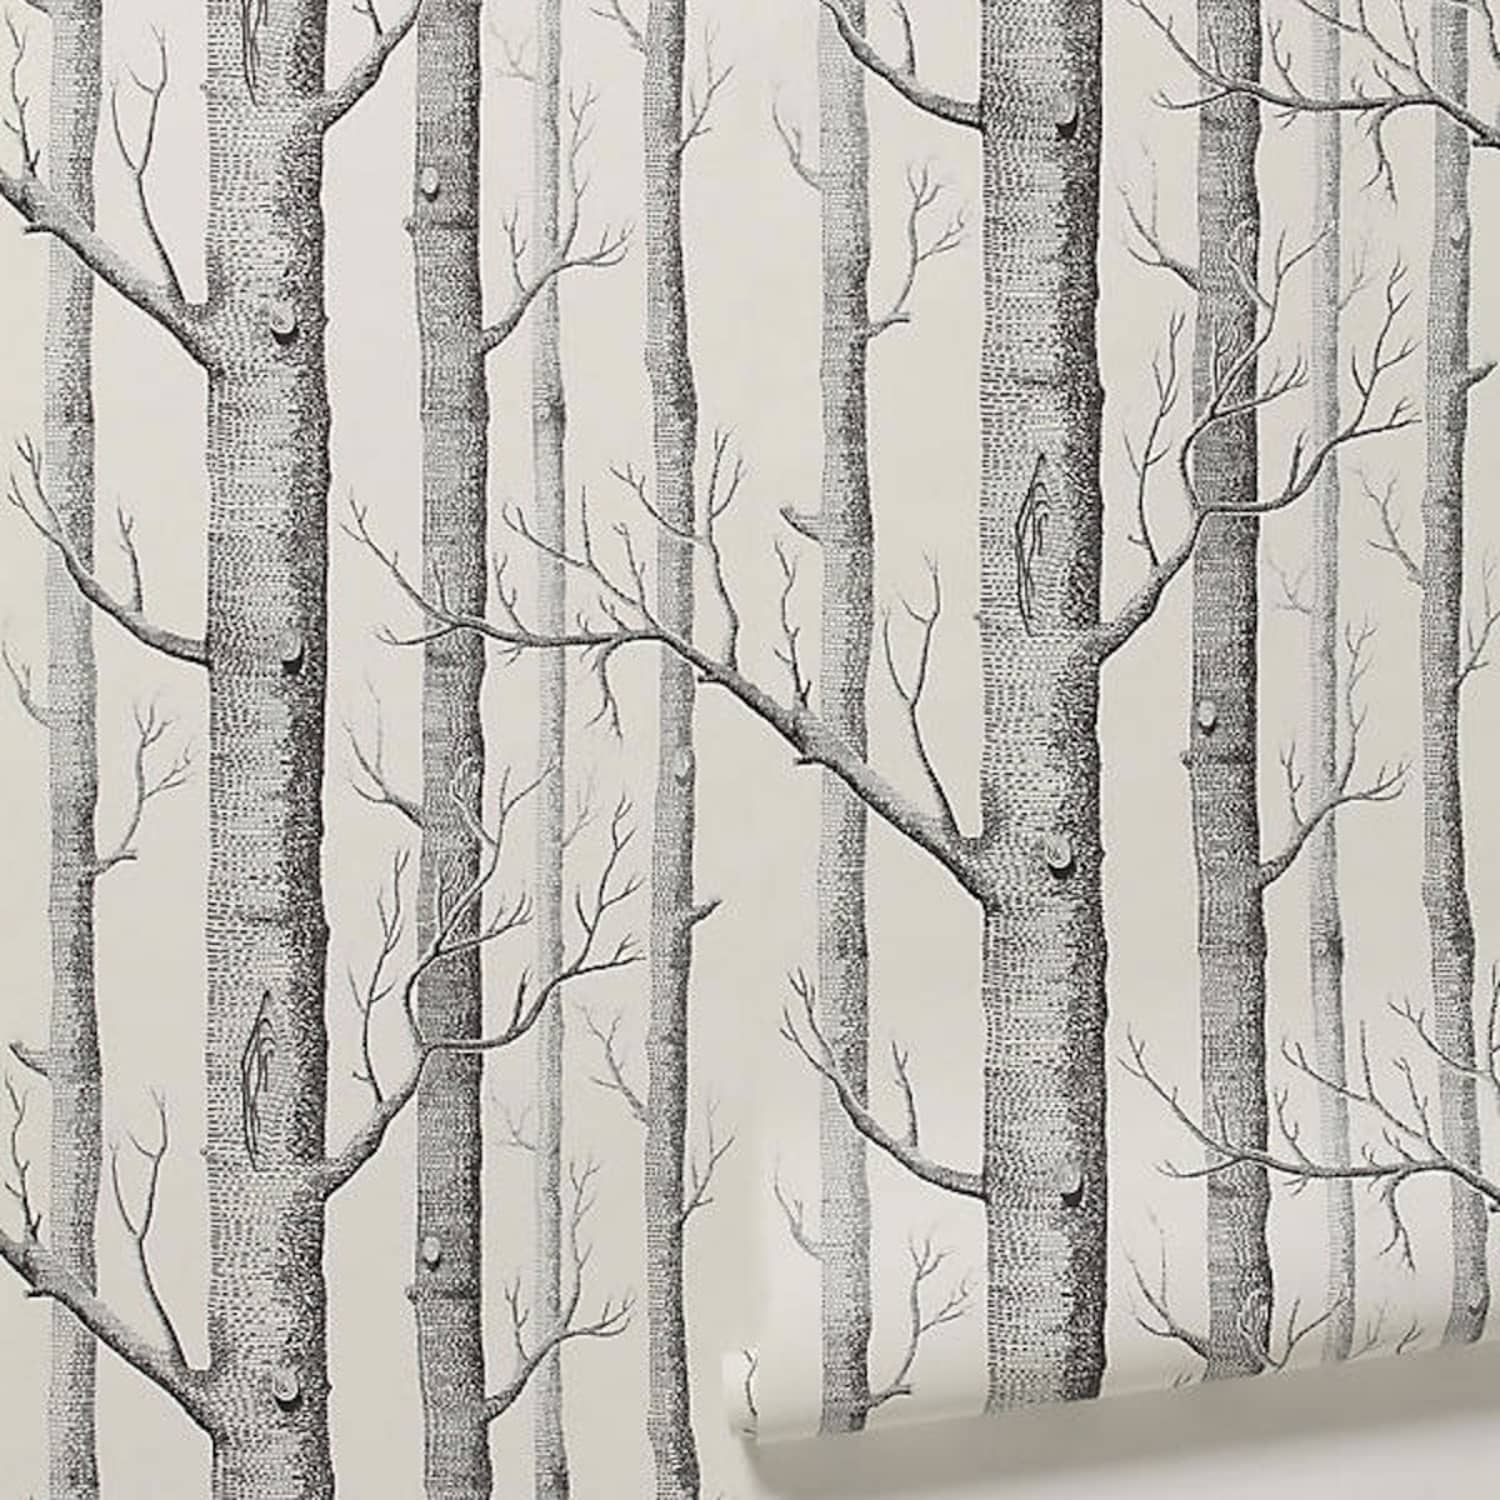 10 Excellent Sources For Buying Birch Tree Wallpaper Apartment Therapy